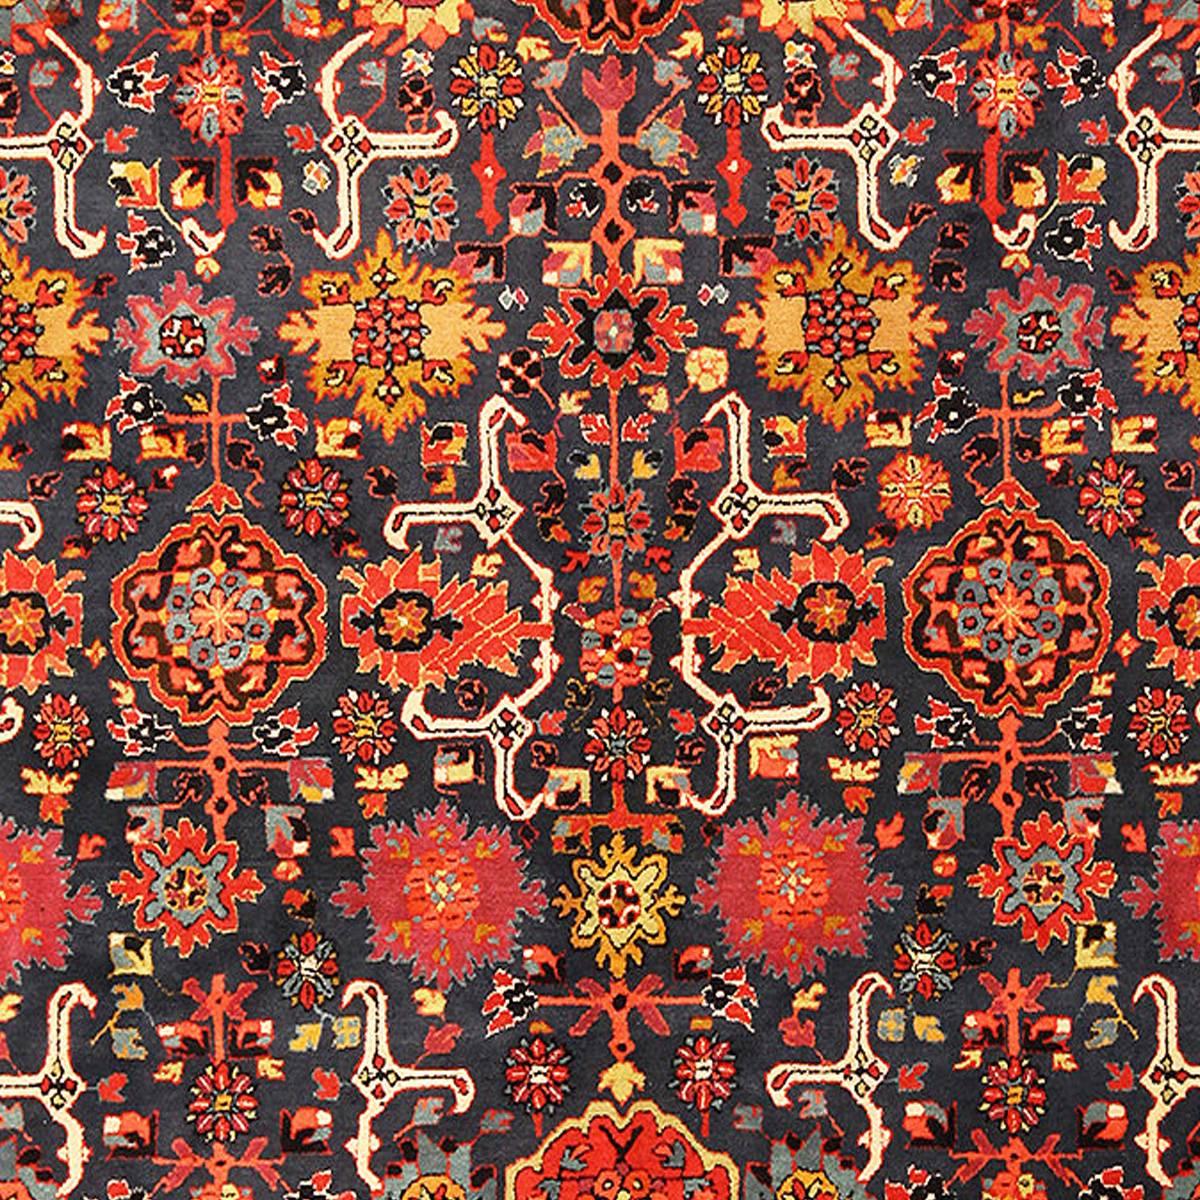 The art of rug-making, while traditionally associated with the East, is in fact a global practice that has been ongoing for centuries. Indeed, the history of rug-making in Western Europe is a rich and fascinating story, just as much so as the